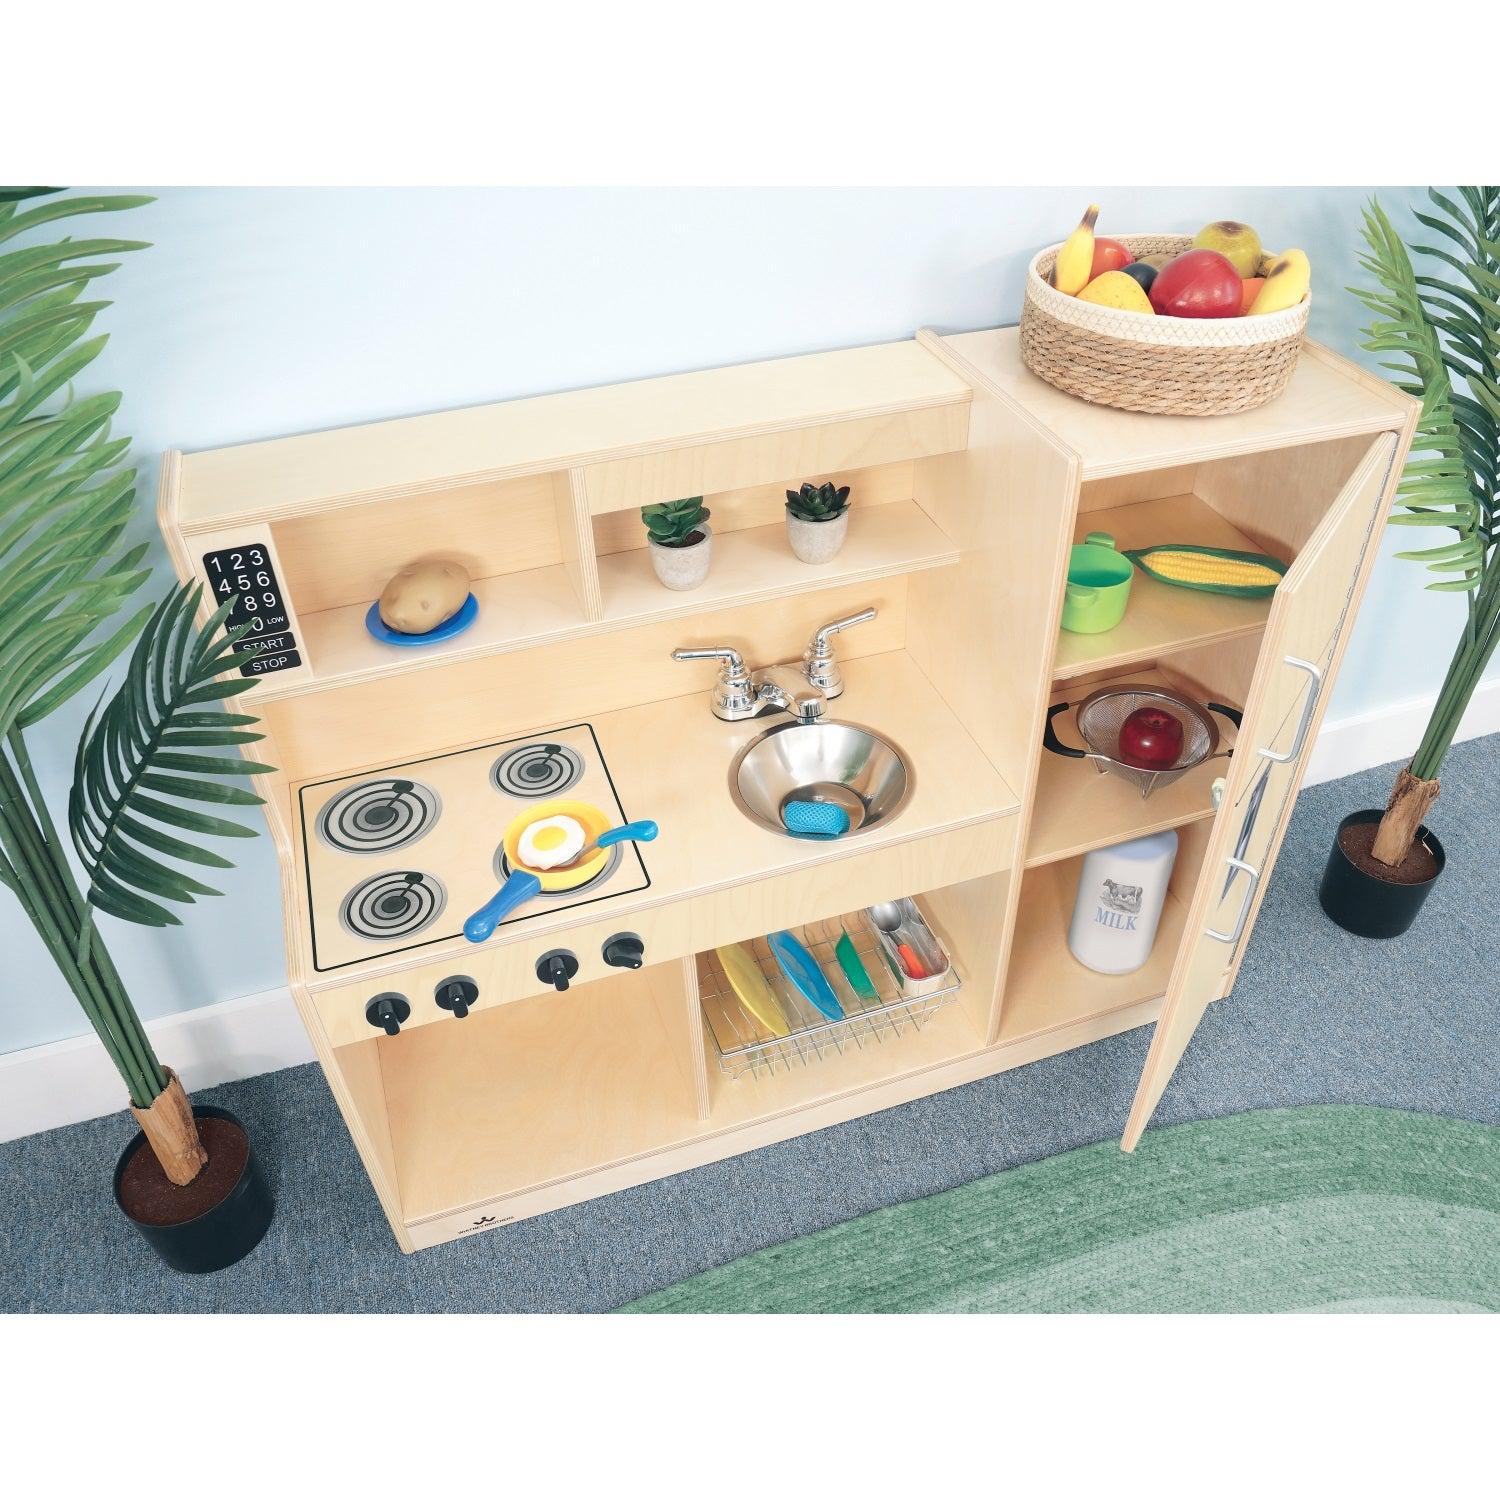 Let's Play Toddler Kitchen Combo, Natural Finish